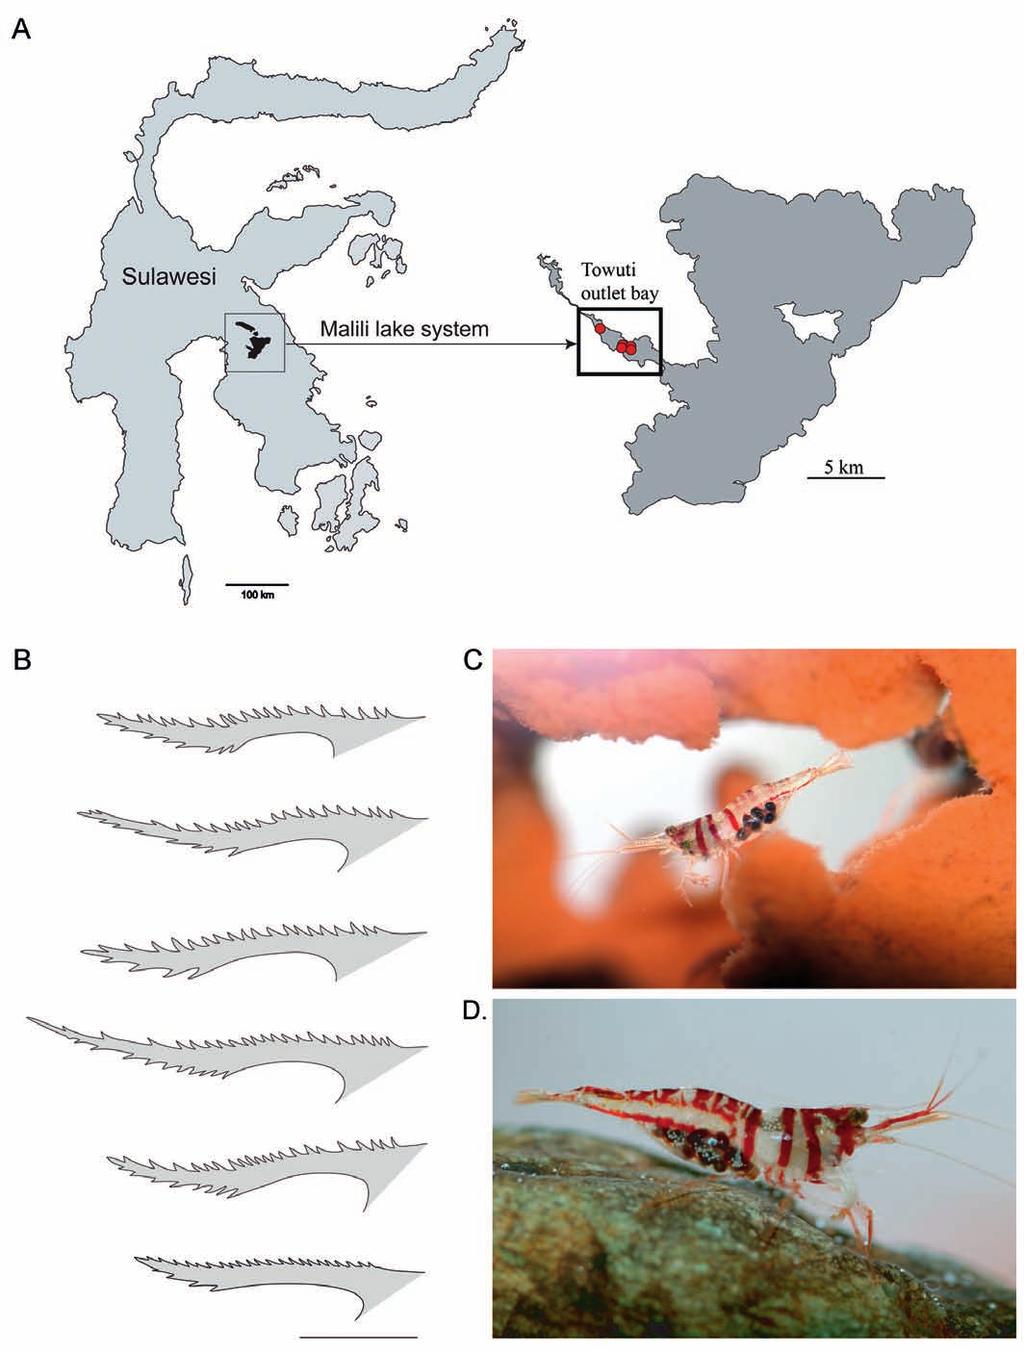 von Rintelen & Cai: Revision of Caridina from ancient lakes of Sulawesi Fig. 36. Caridina spongicola from the Malili lake system. A. Distribution. B.